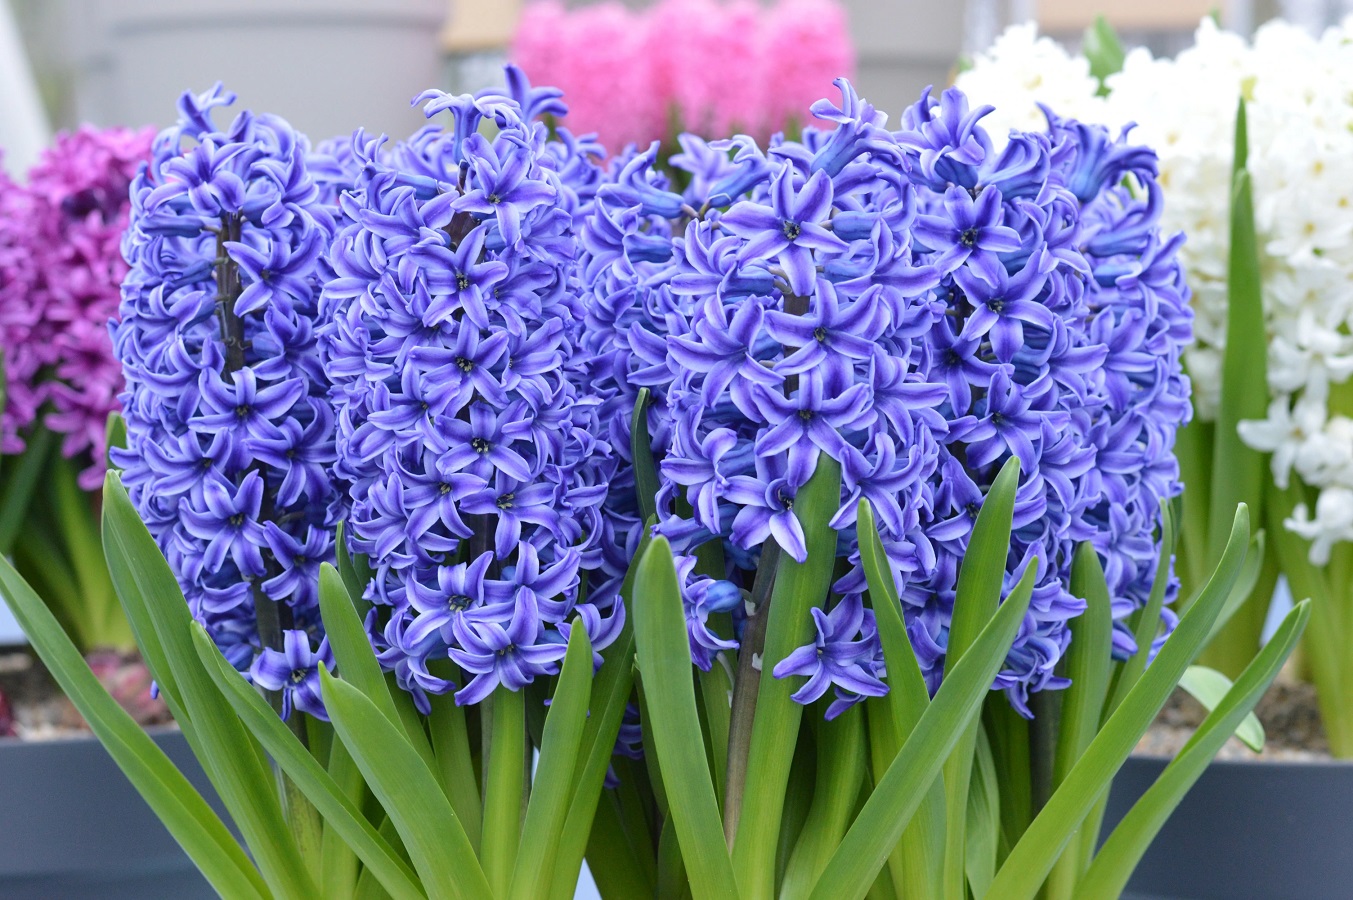 Hyacinth Flower - Care, Needs and Practical Gardening Tips